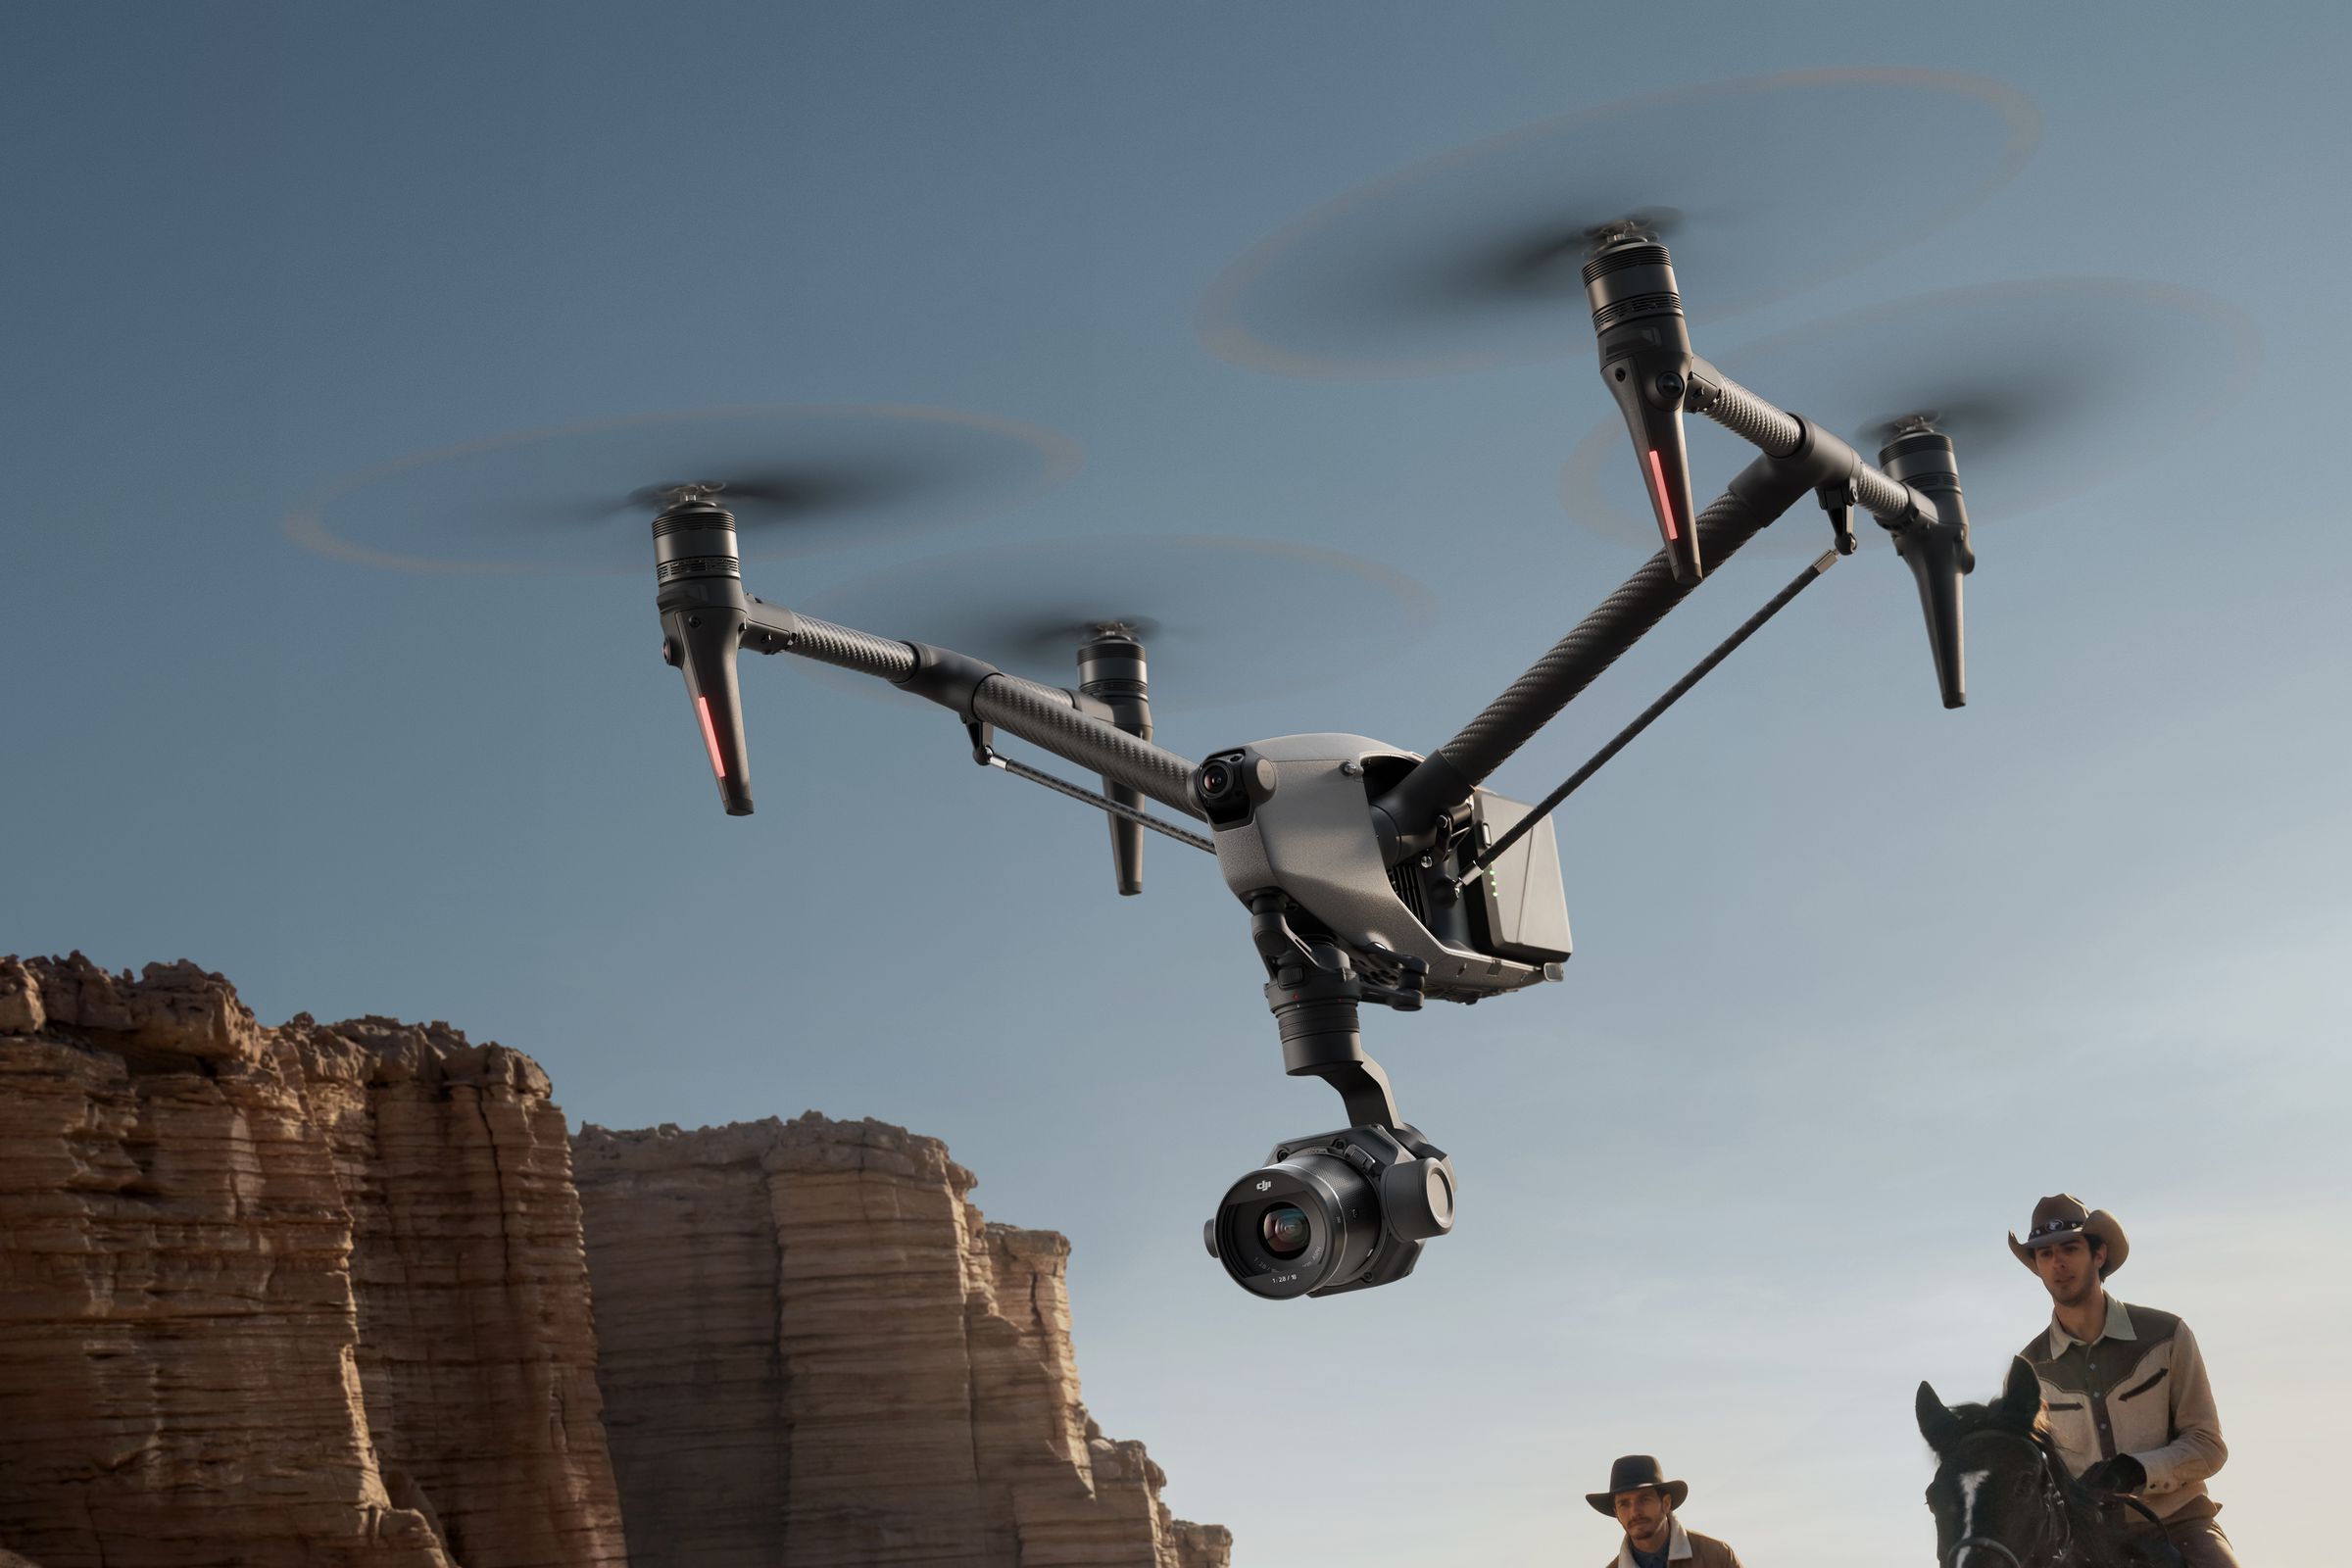 Inspire 3 drone flying low with cowboys on horses following it and cliffs in the background